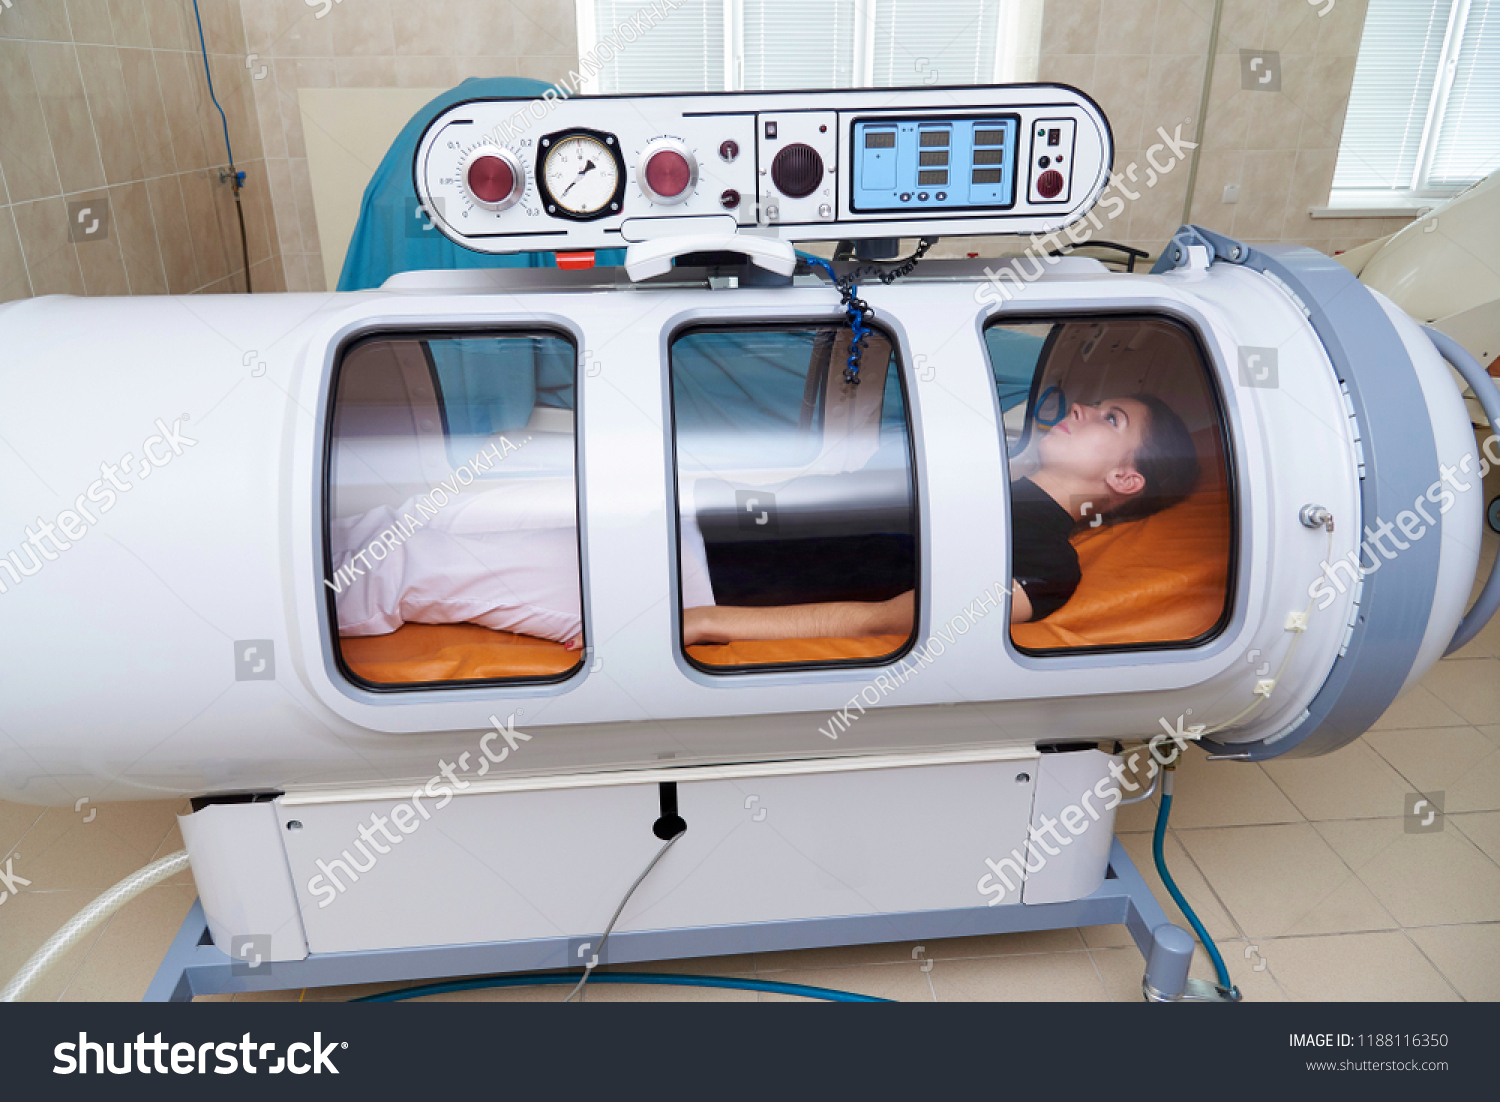 Hyperbaric oxygen chamber in a hospital. #1188116350